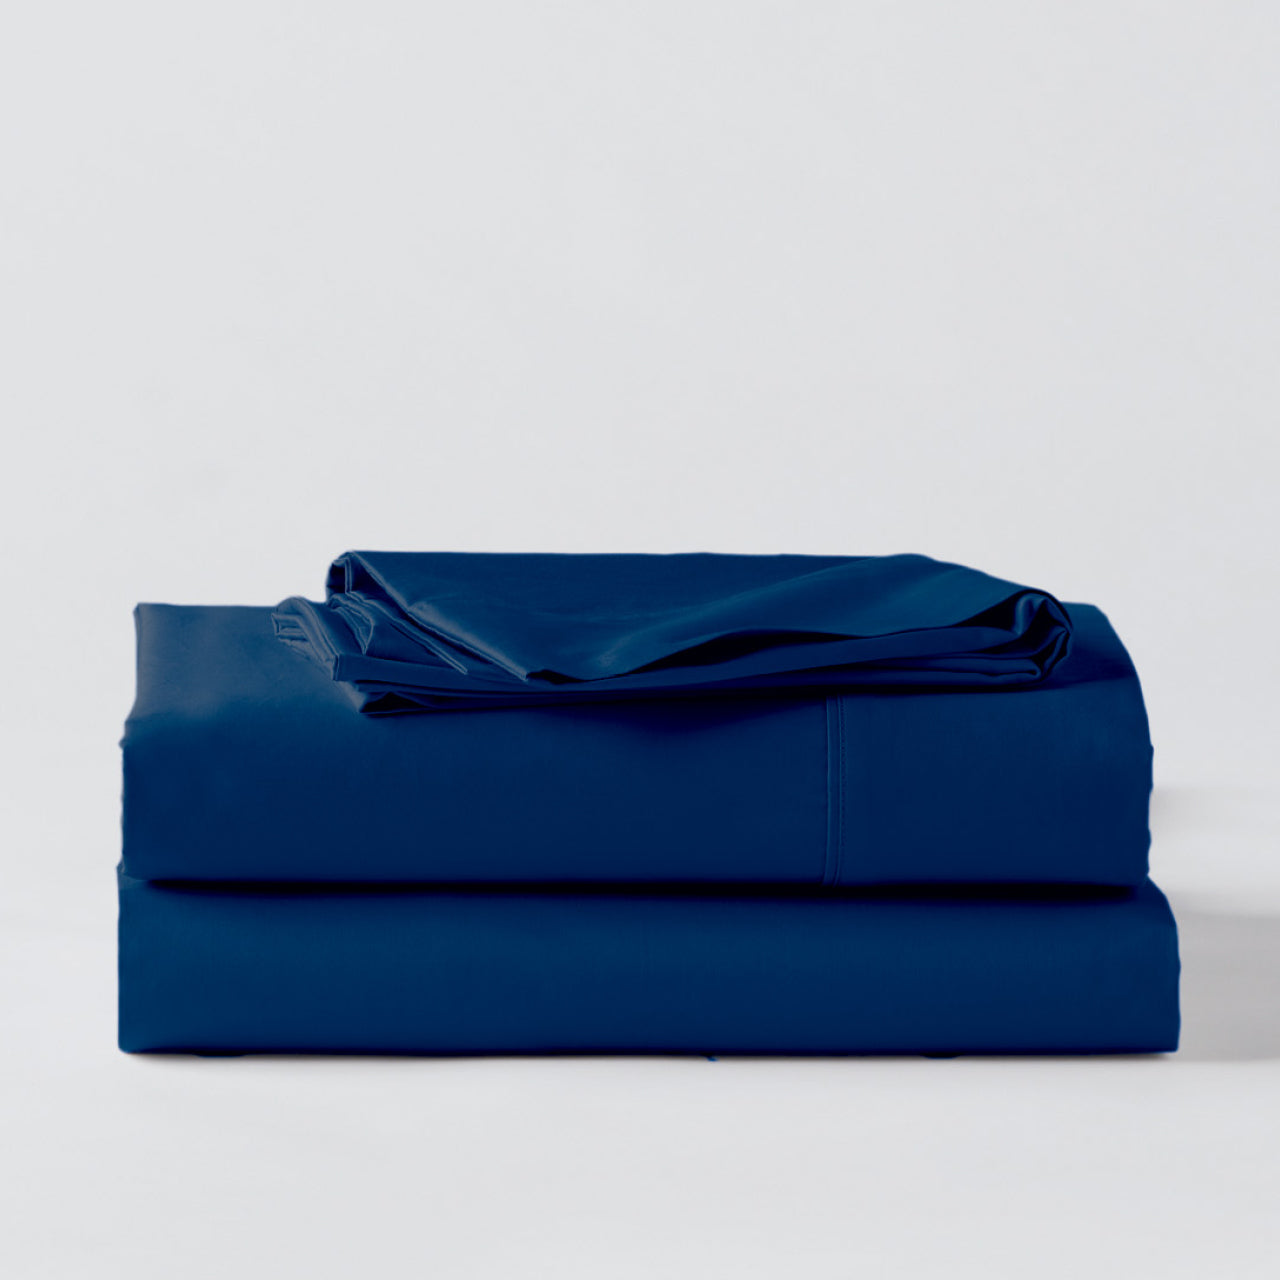 Premium Percale Midnight Sheets folded up on floor